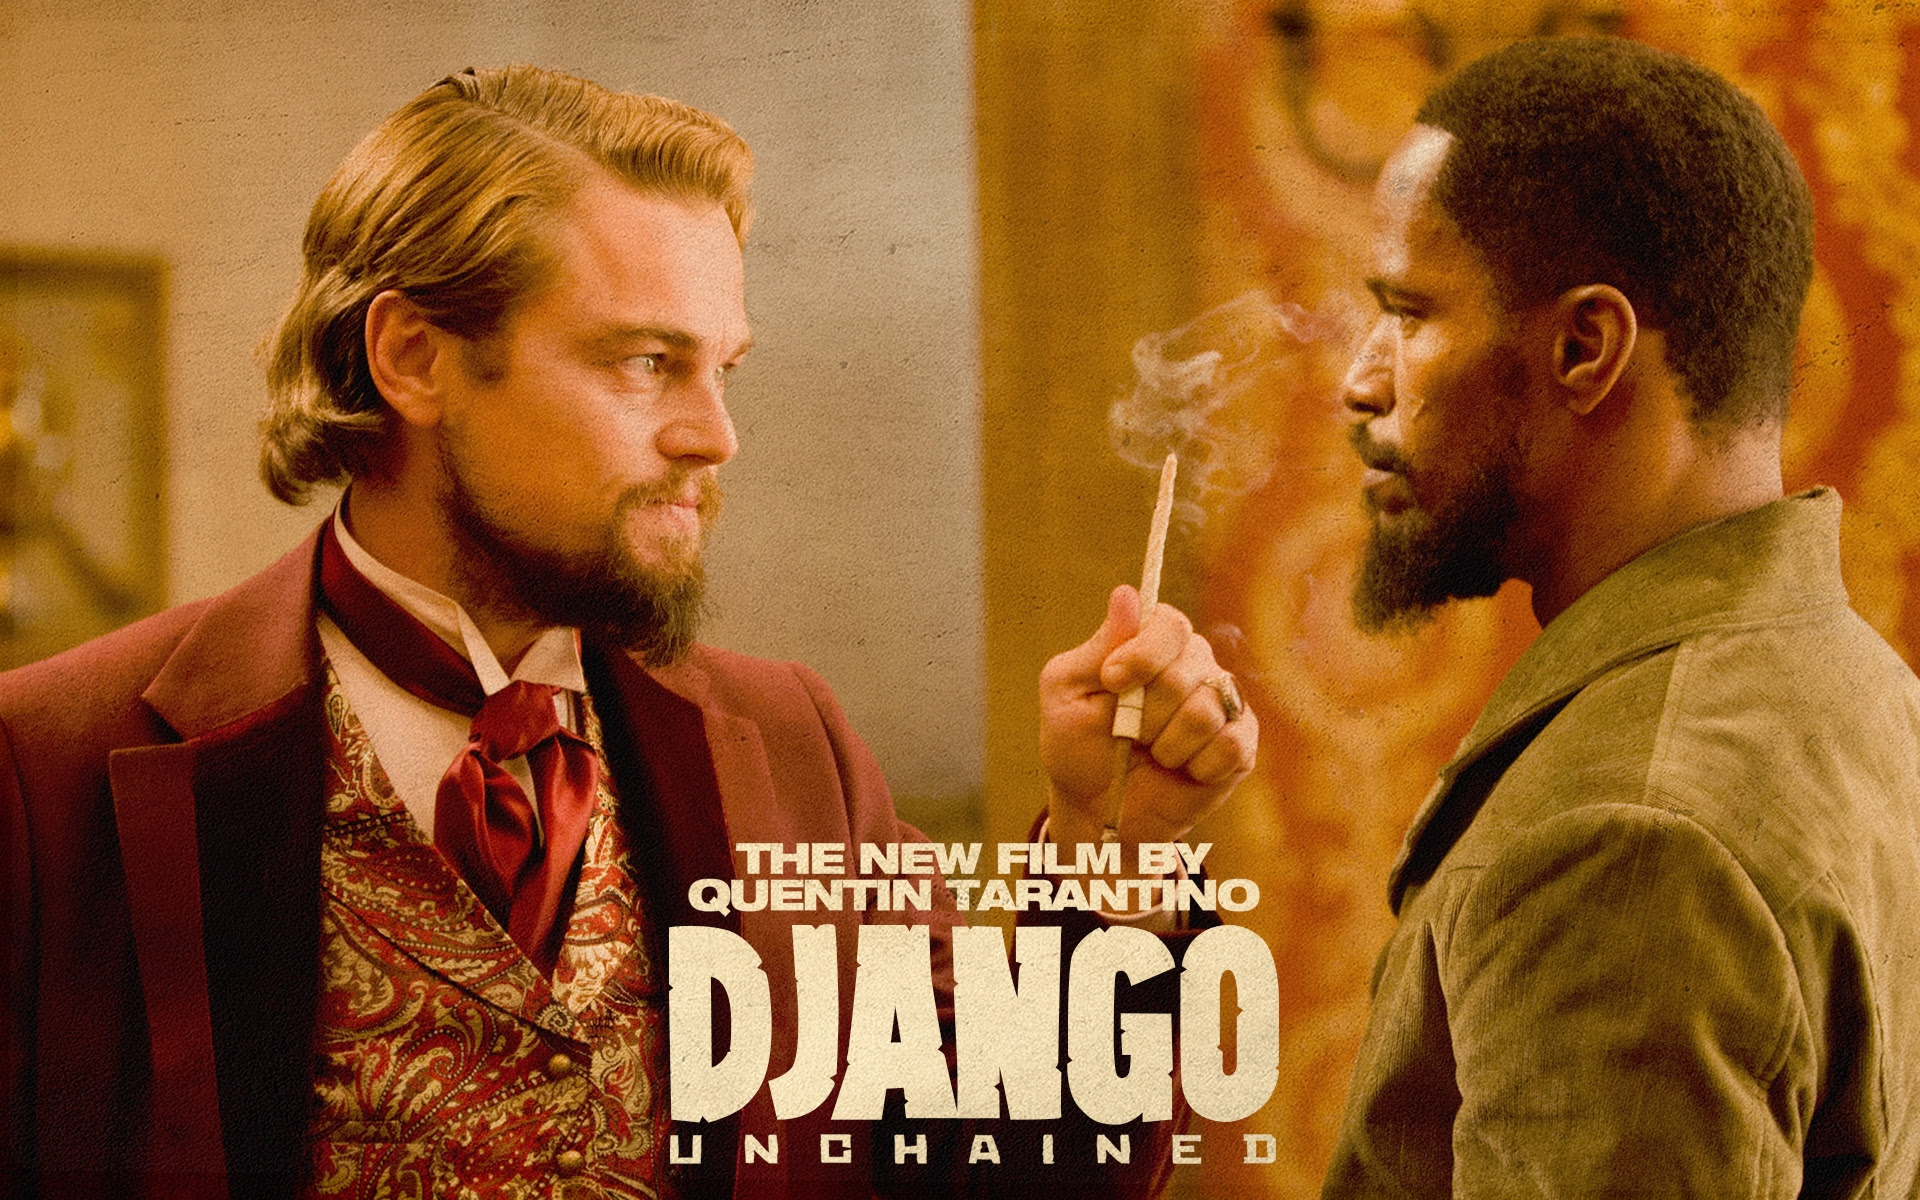 Movies watched by Physicist: ”Django Unchained” (2012)